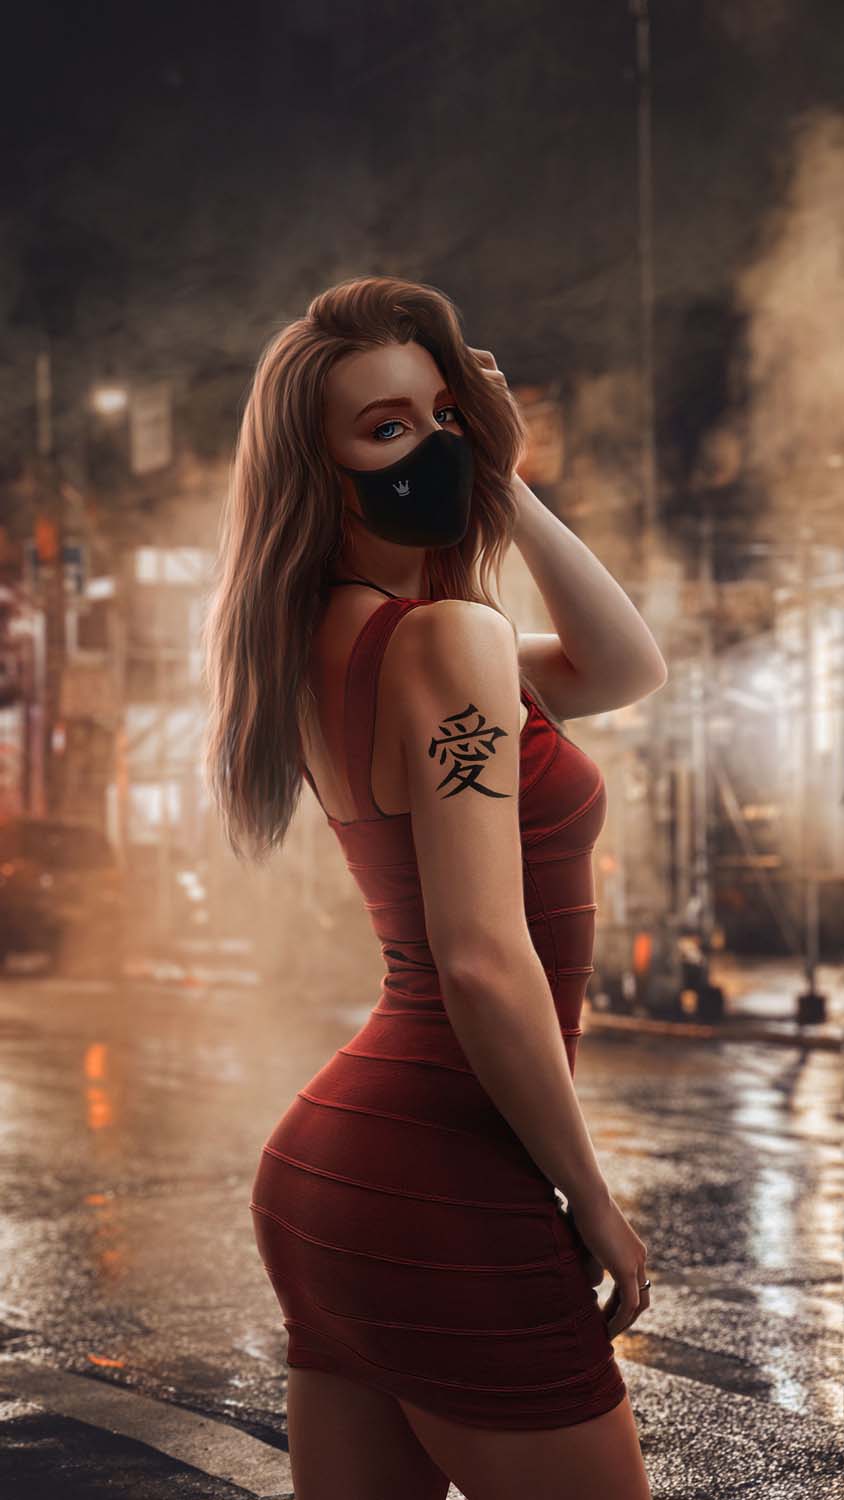 Girl with Tattoo iPhone Wallpaper HD